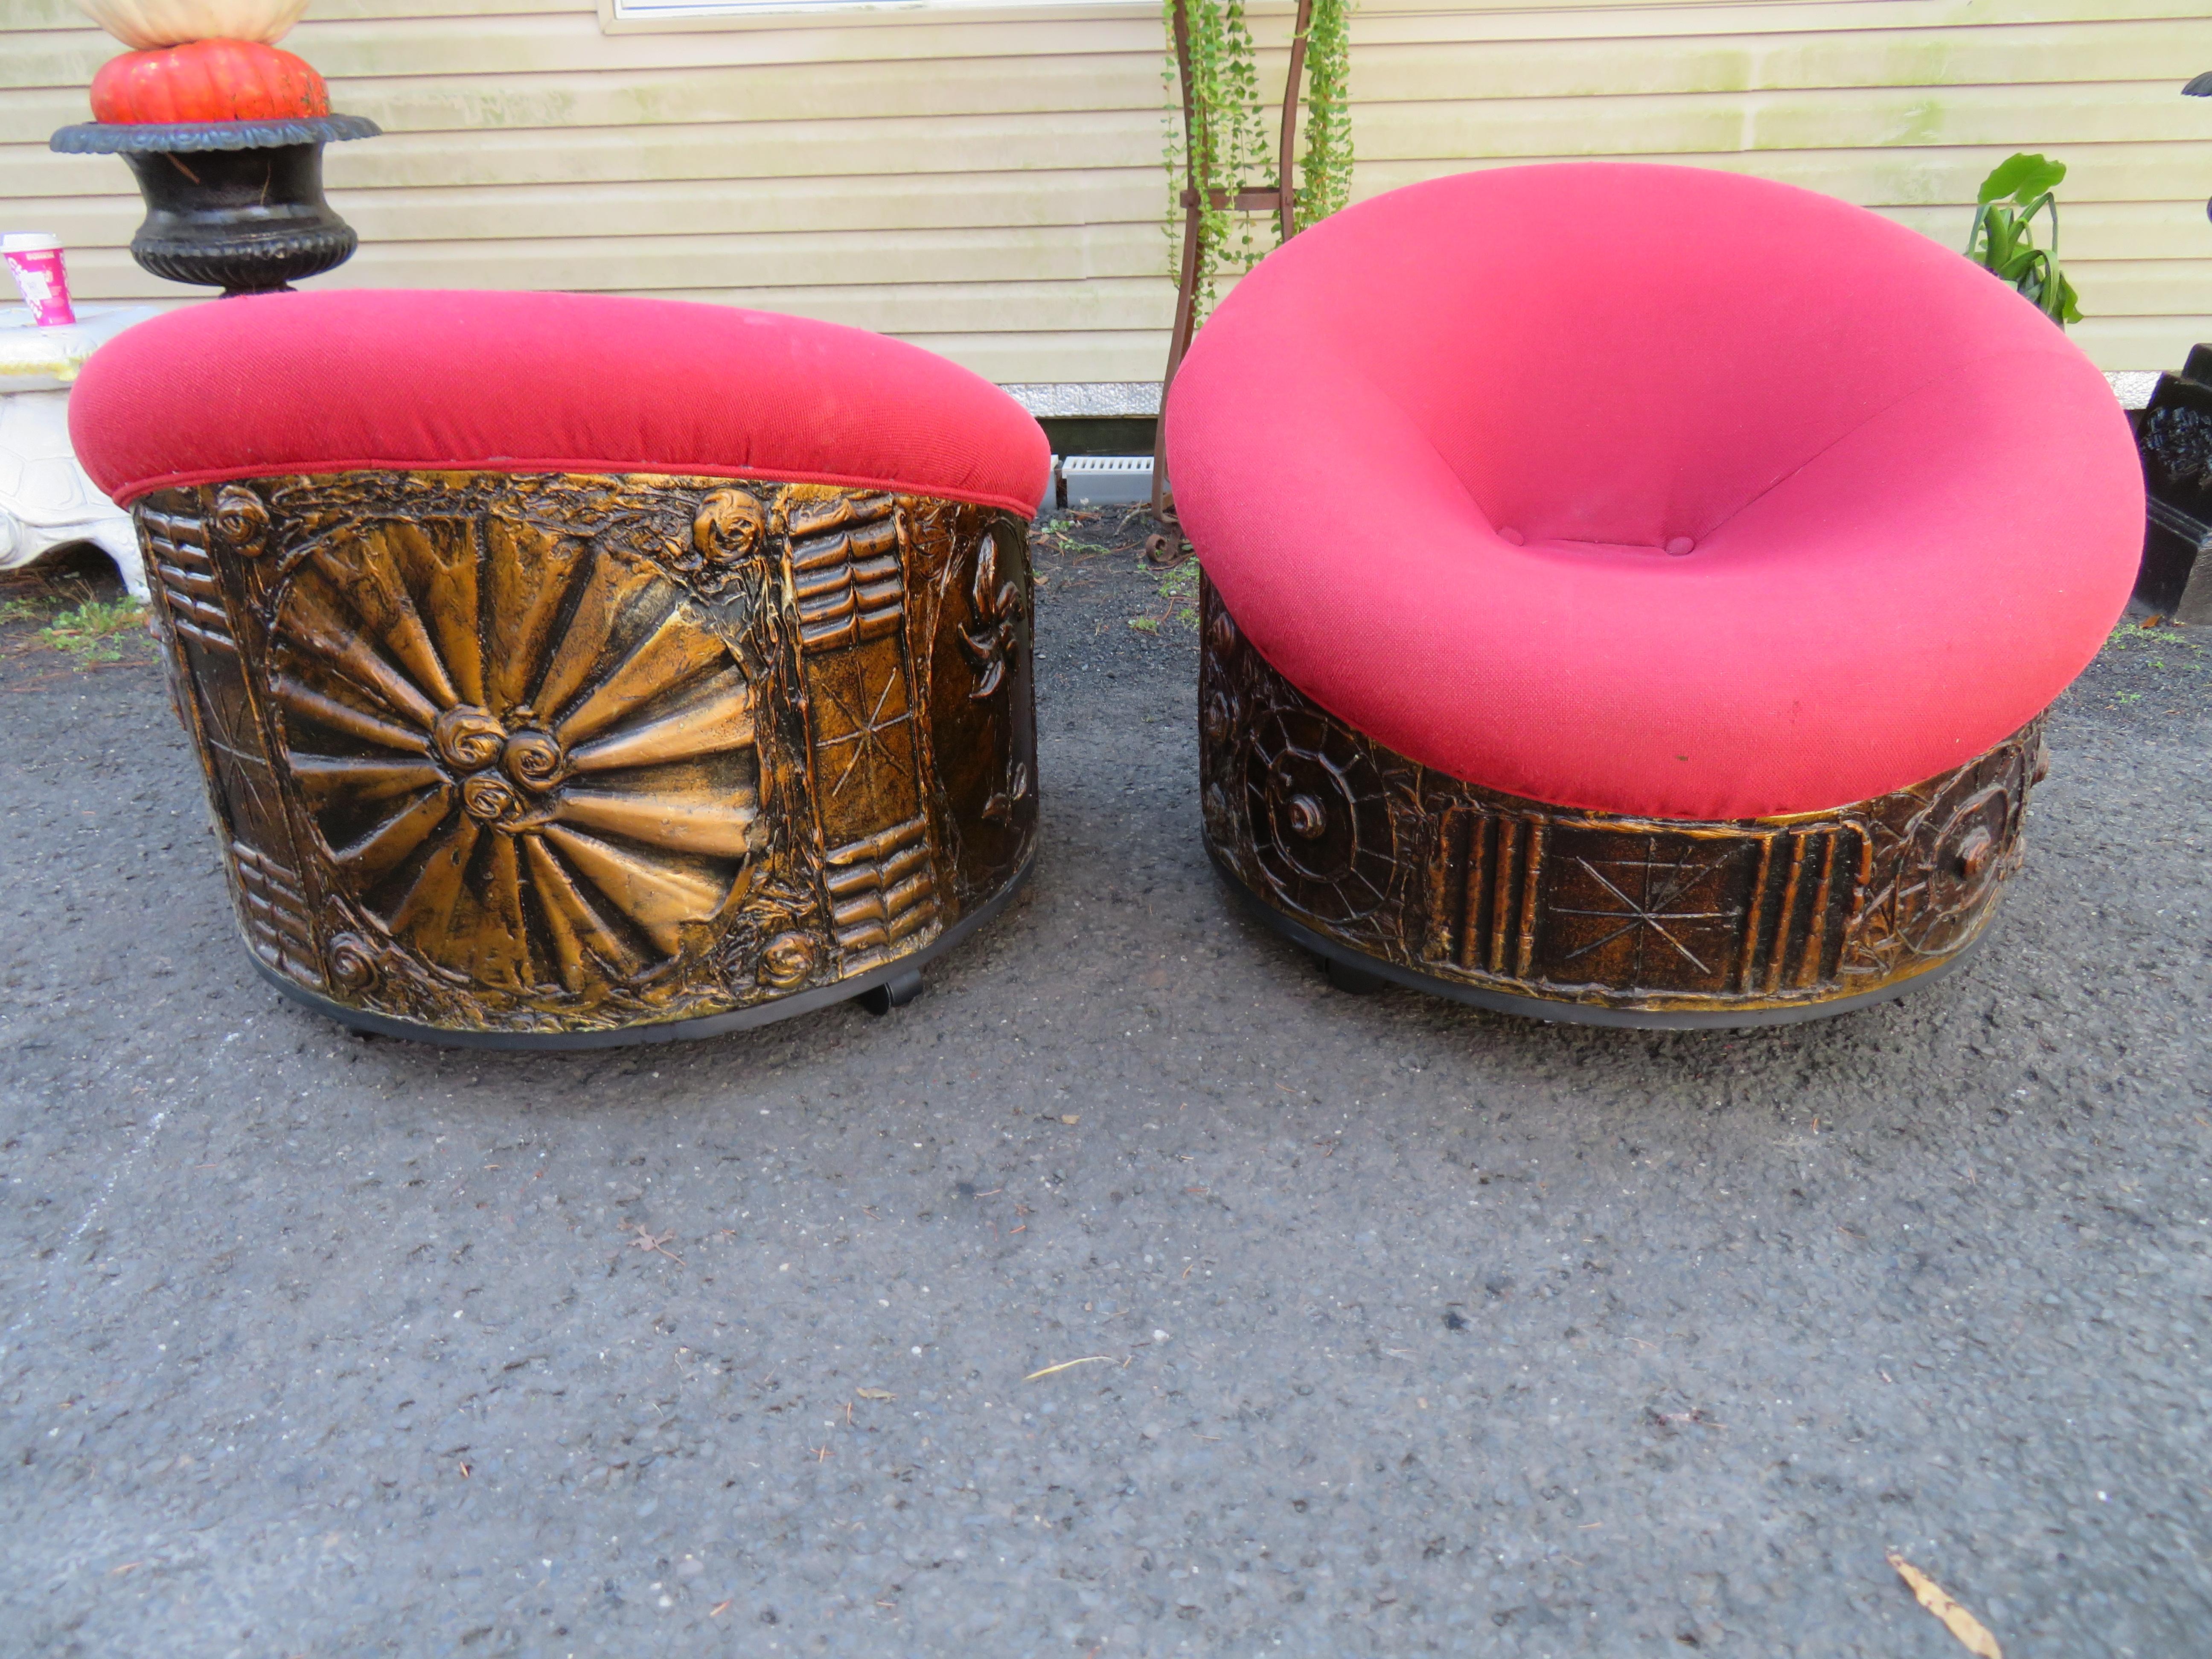 Amazing pair of Adrian Pearsall Brutalist pod lounge chairs. Chairs retain their original red woven wool fabric in faded useable condition-cleaning is recommended! Sculpted Brutalist bases are in very nice vintage condition-some minor chips here and